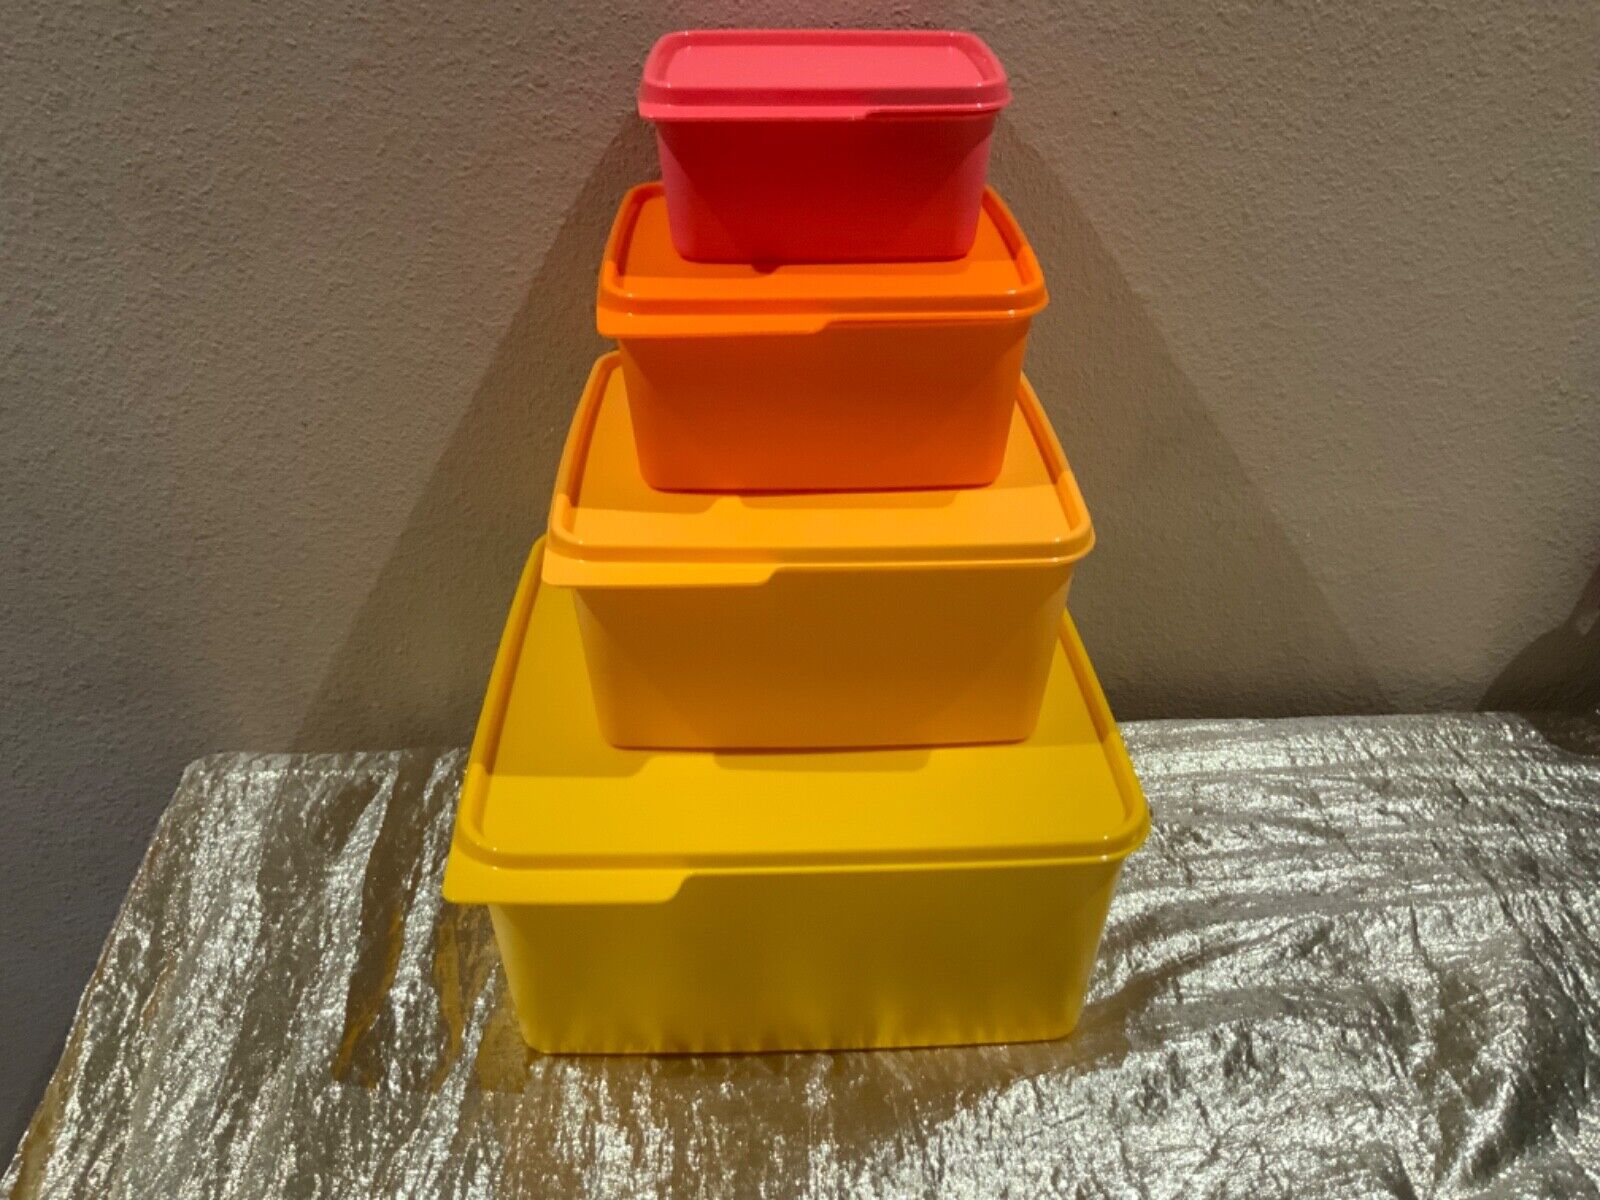 New Tupperware Beautiful Fall Colors Basic Line Stacking Containers Set of 4